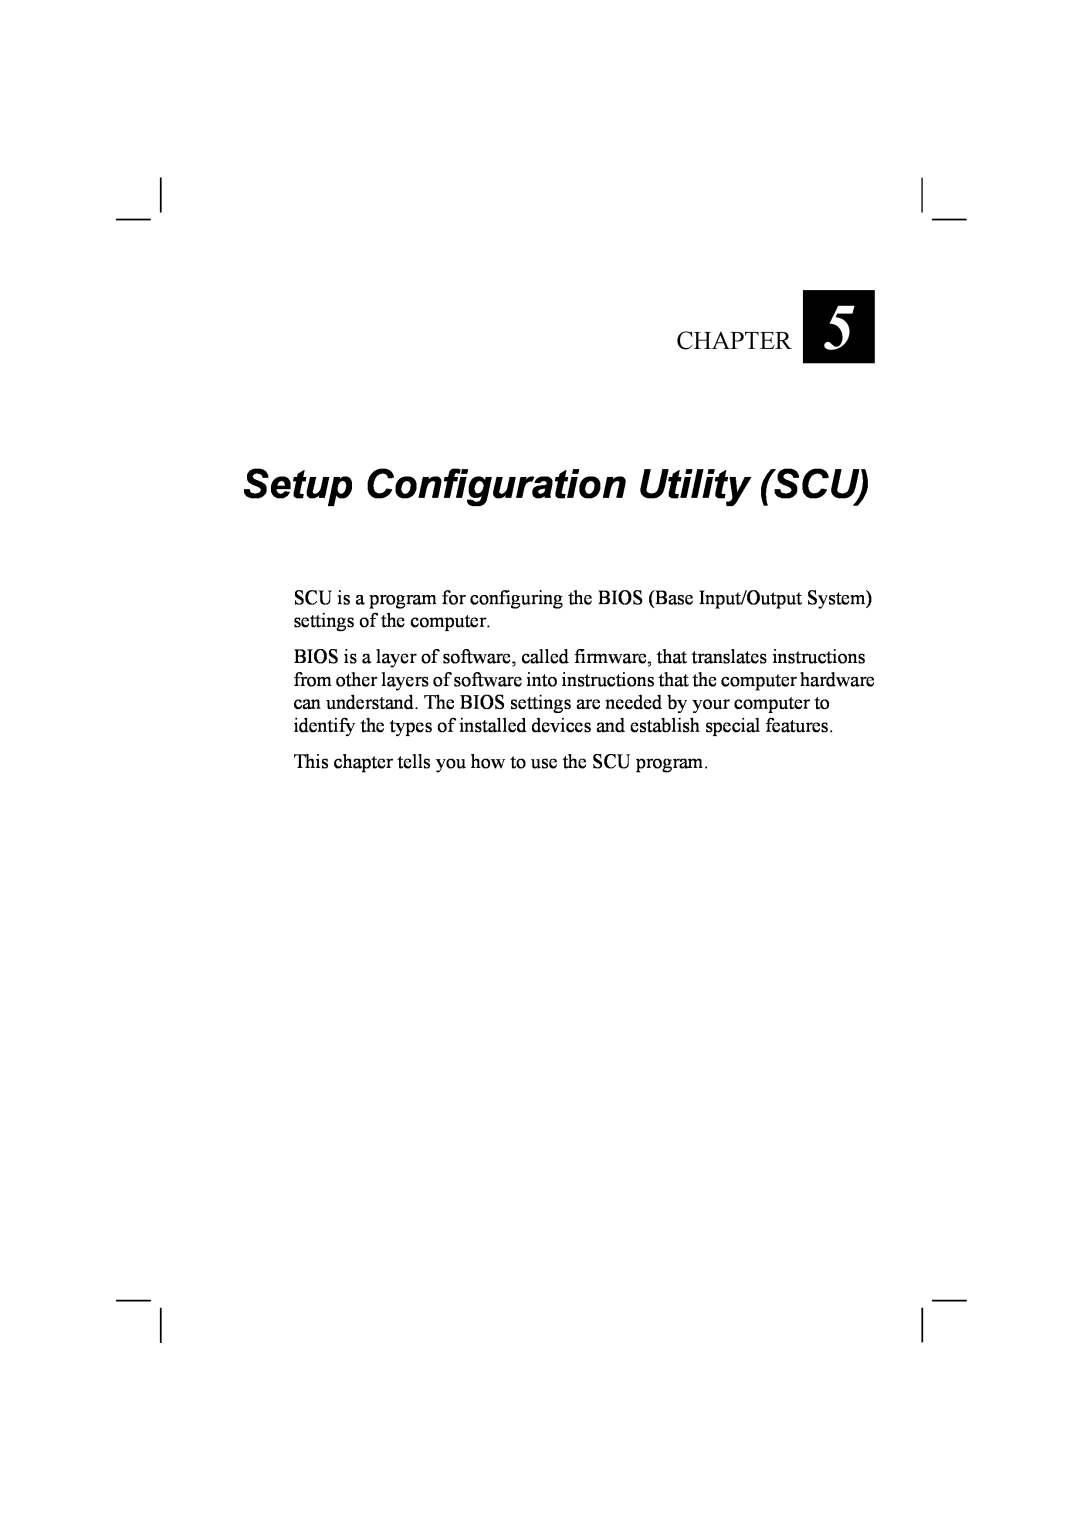 TAG 10 manual Setup Configuration Utility SCU, Chapter, This chapter tells you how to use the SCU program 